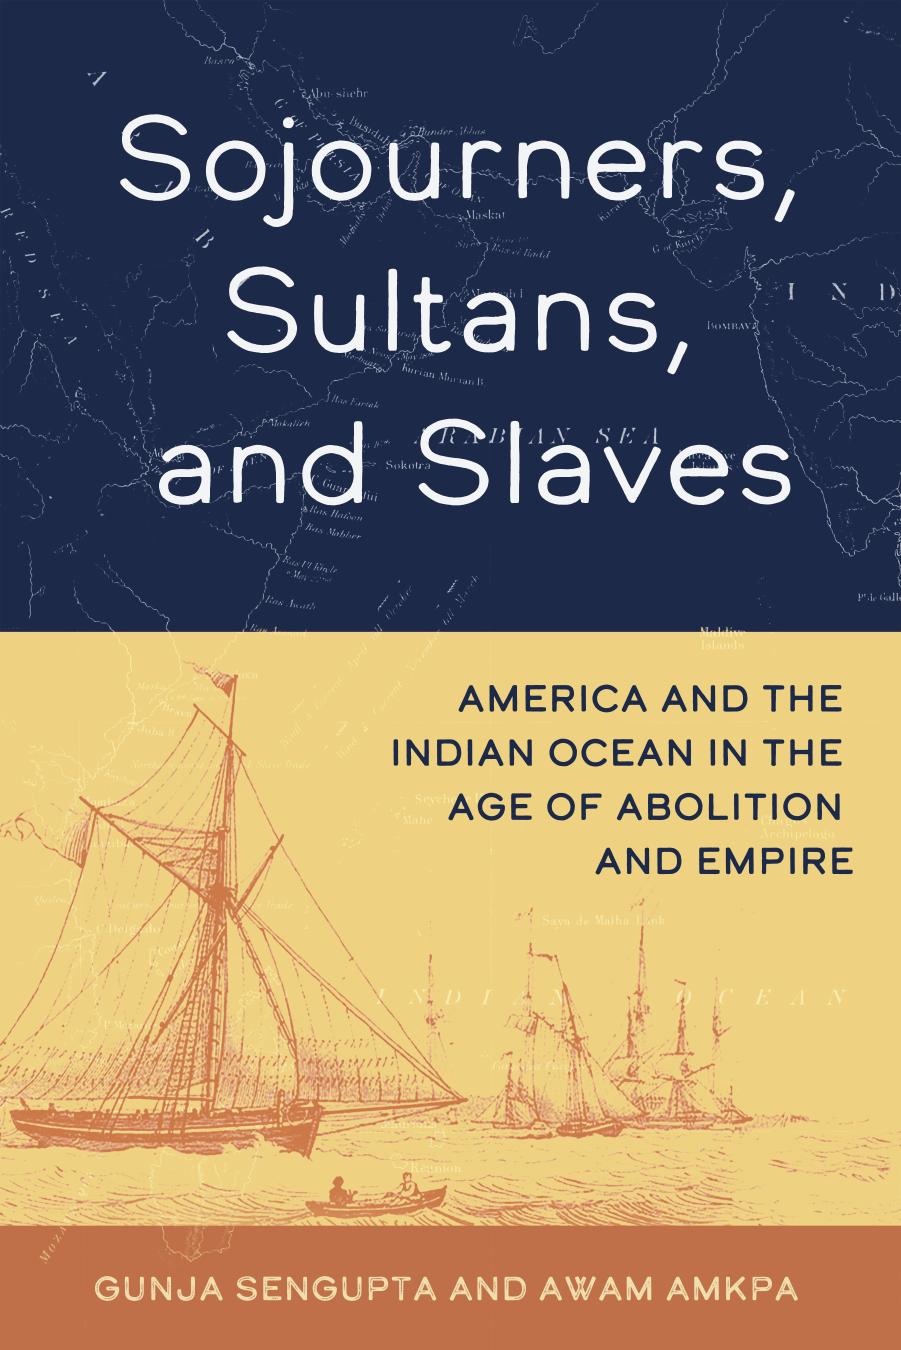 Sojourners, Sultans, and Slaves: America and the Indian Ocean in the Age of Abolition and Empire by Gunja SenGupta Awam Amkpa